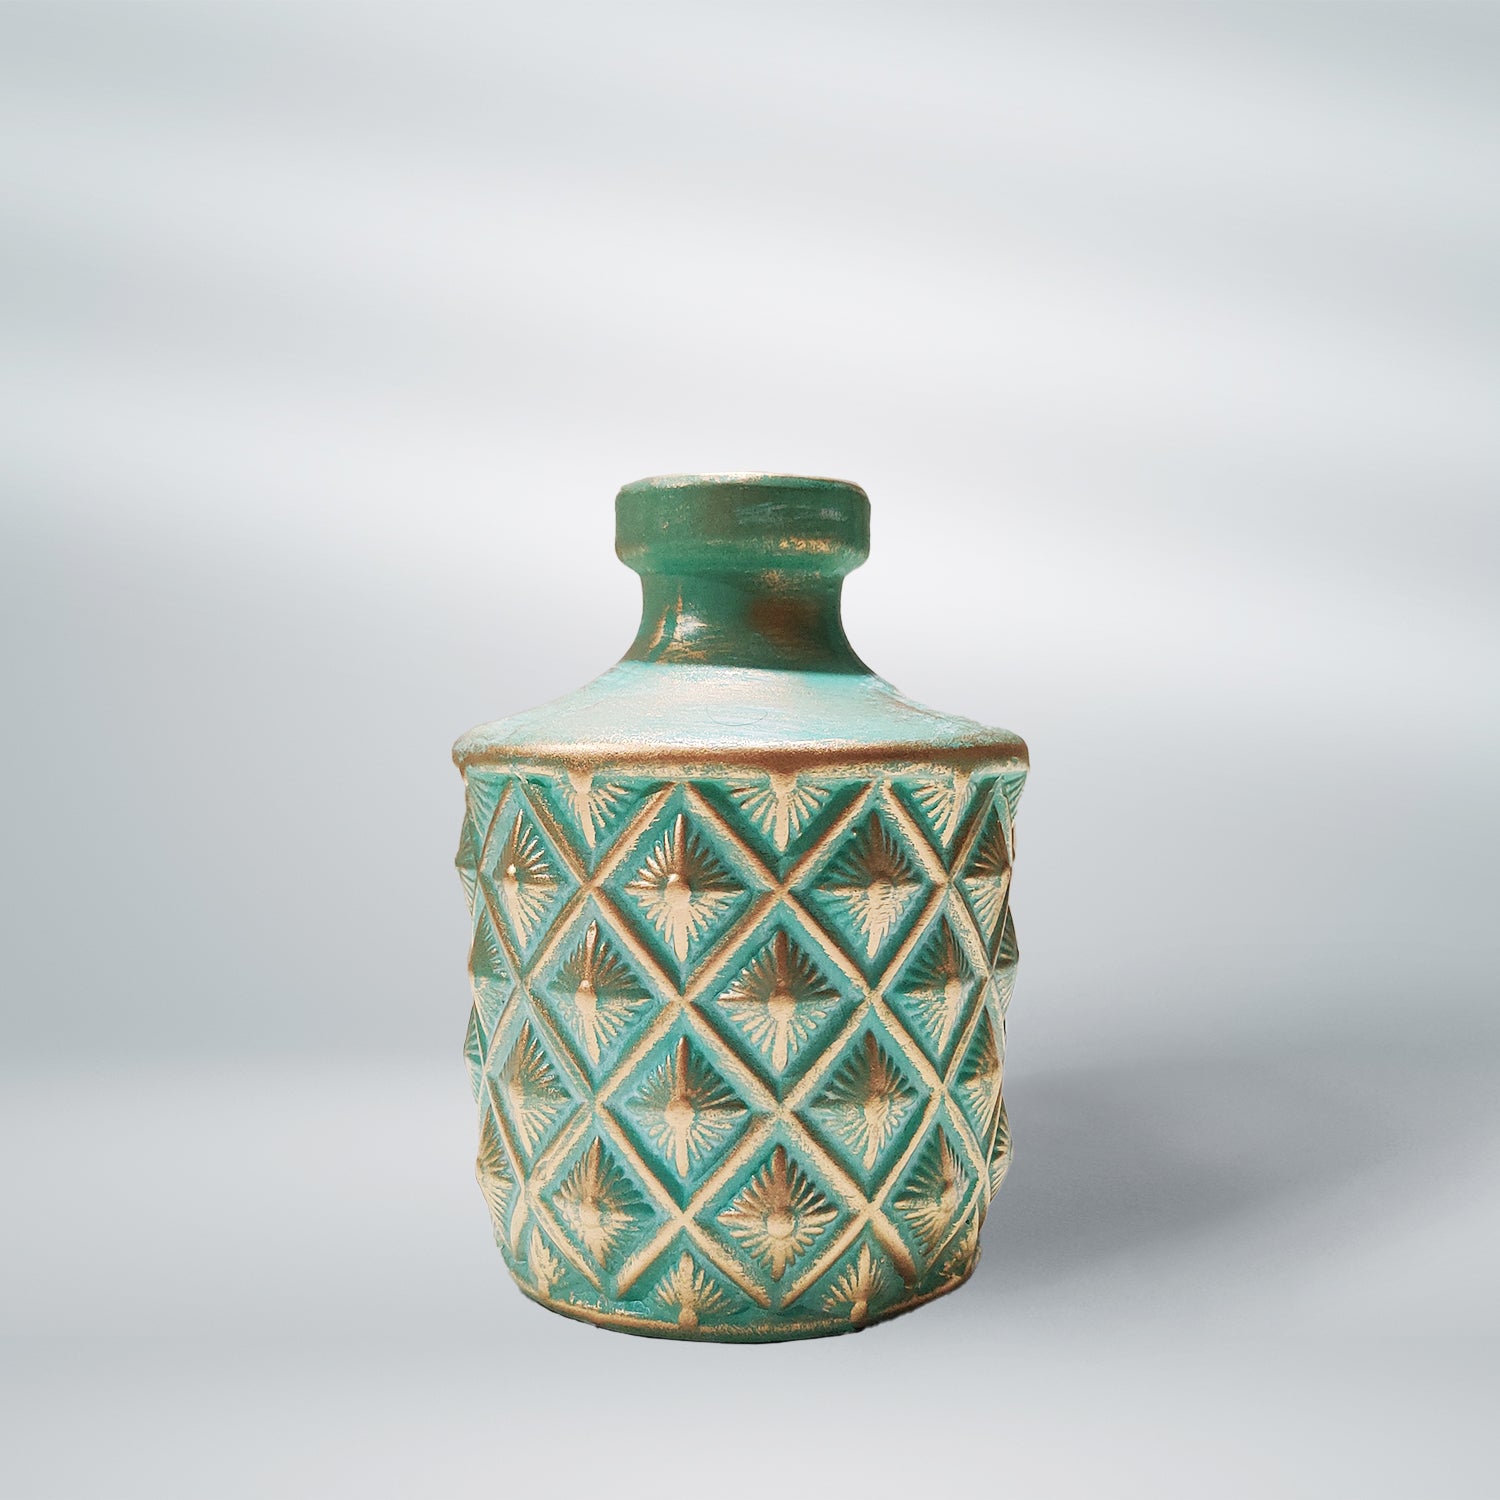 Royal Art Green & Golden Decorative Sustainable Ceramic Vase - 7 x 5 inches | Peacoy